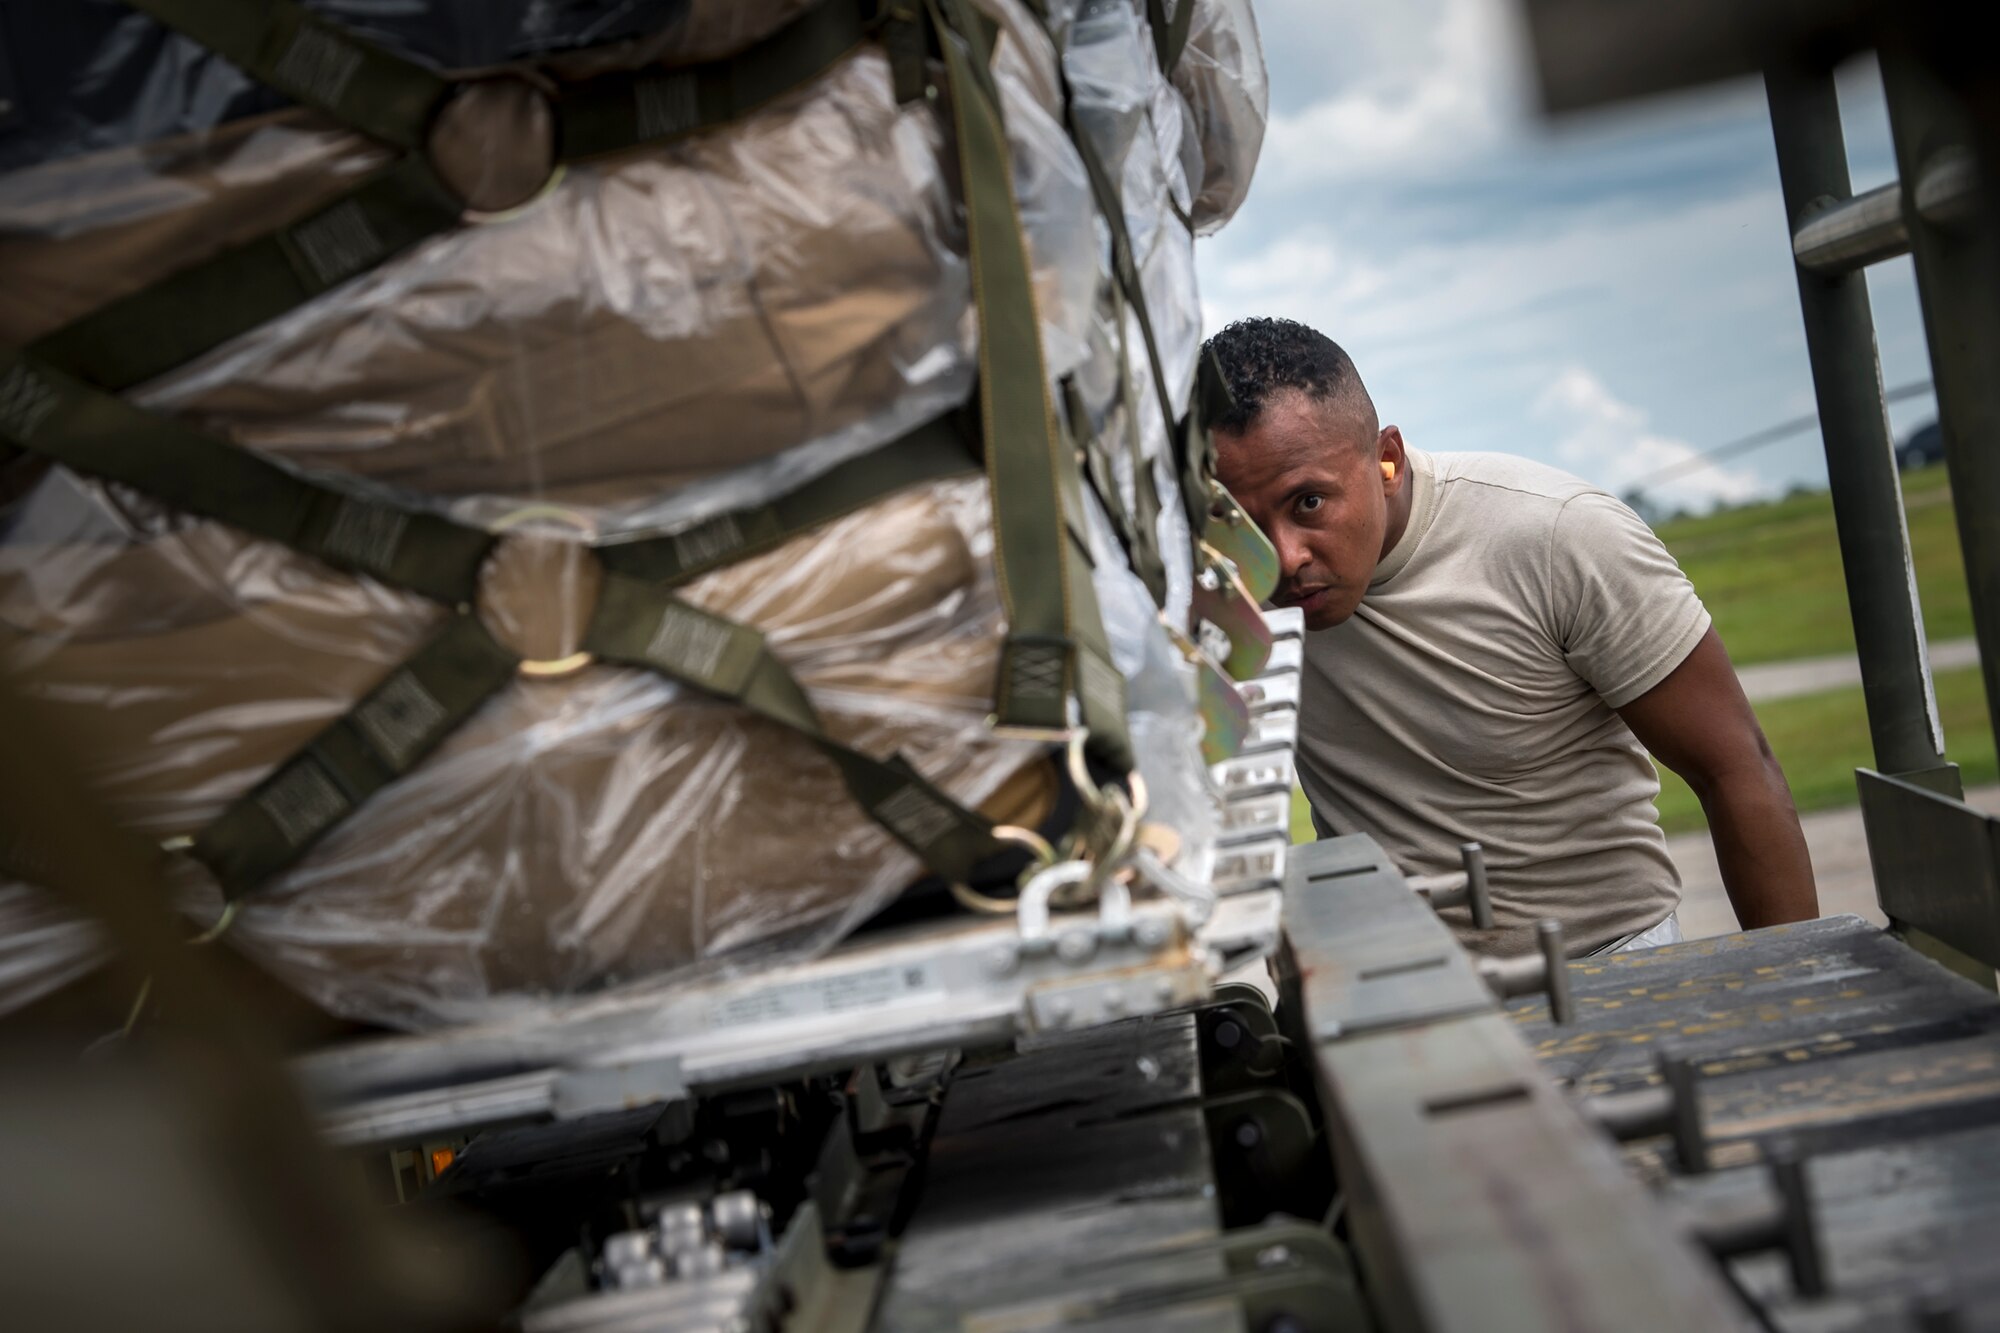 Staff Sgt. Mauricio Castaneda, 23d Logistics Readiness Squadron assistant NCO in charge of air terminal operations, inspects the alignment of cargo on a transport belt, July 5, 2018, at Moody Air Force Base, Ga. Airmen loaded approximately 68,000 pounds of cargo onto a C-17 Globemaster III to aid the 75th Fighter Squadron (FS) prior to a deployment. The 75th FS and supporting units recently deployed to an undisclosed location in support of Operation Spartan Shield. (U.S. Air Force photo by Airman 1st Class Eugene Oliver)